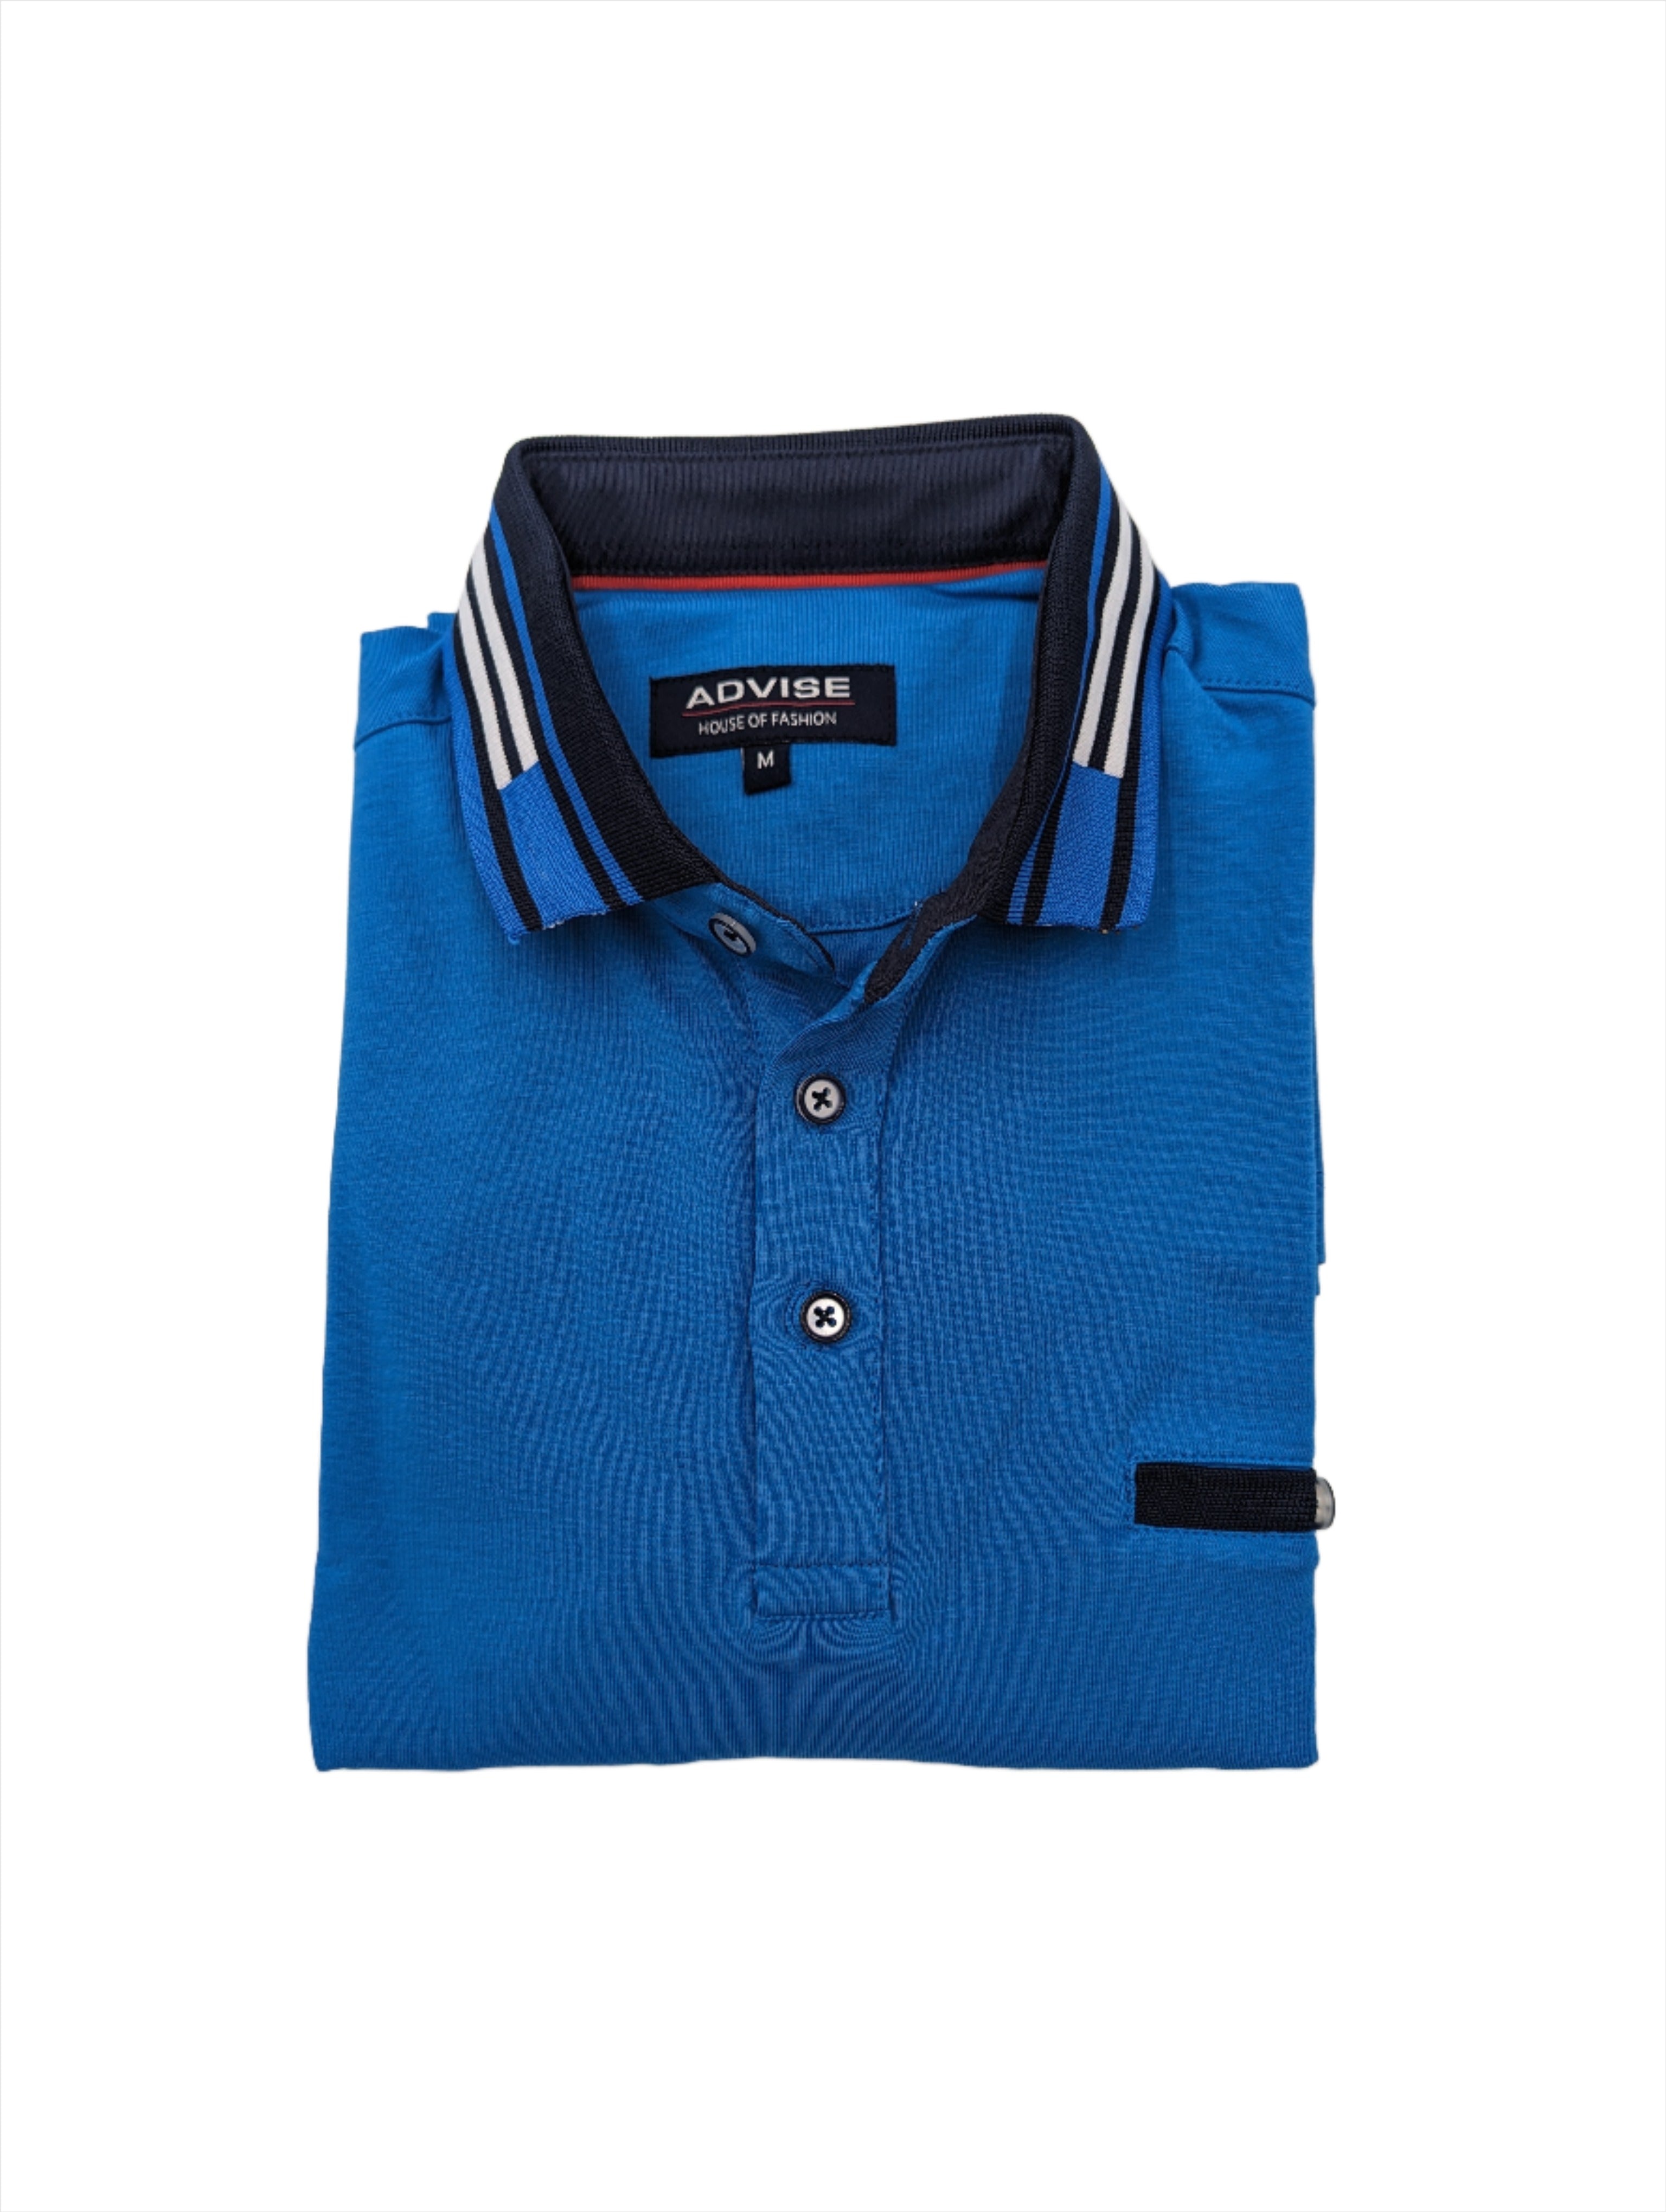 Advise Polo Shirt - Cobalt-Front view